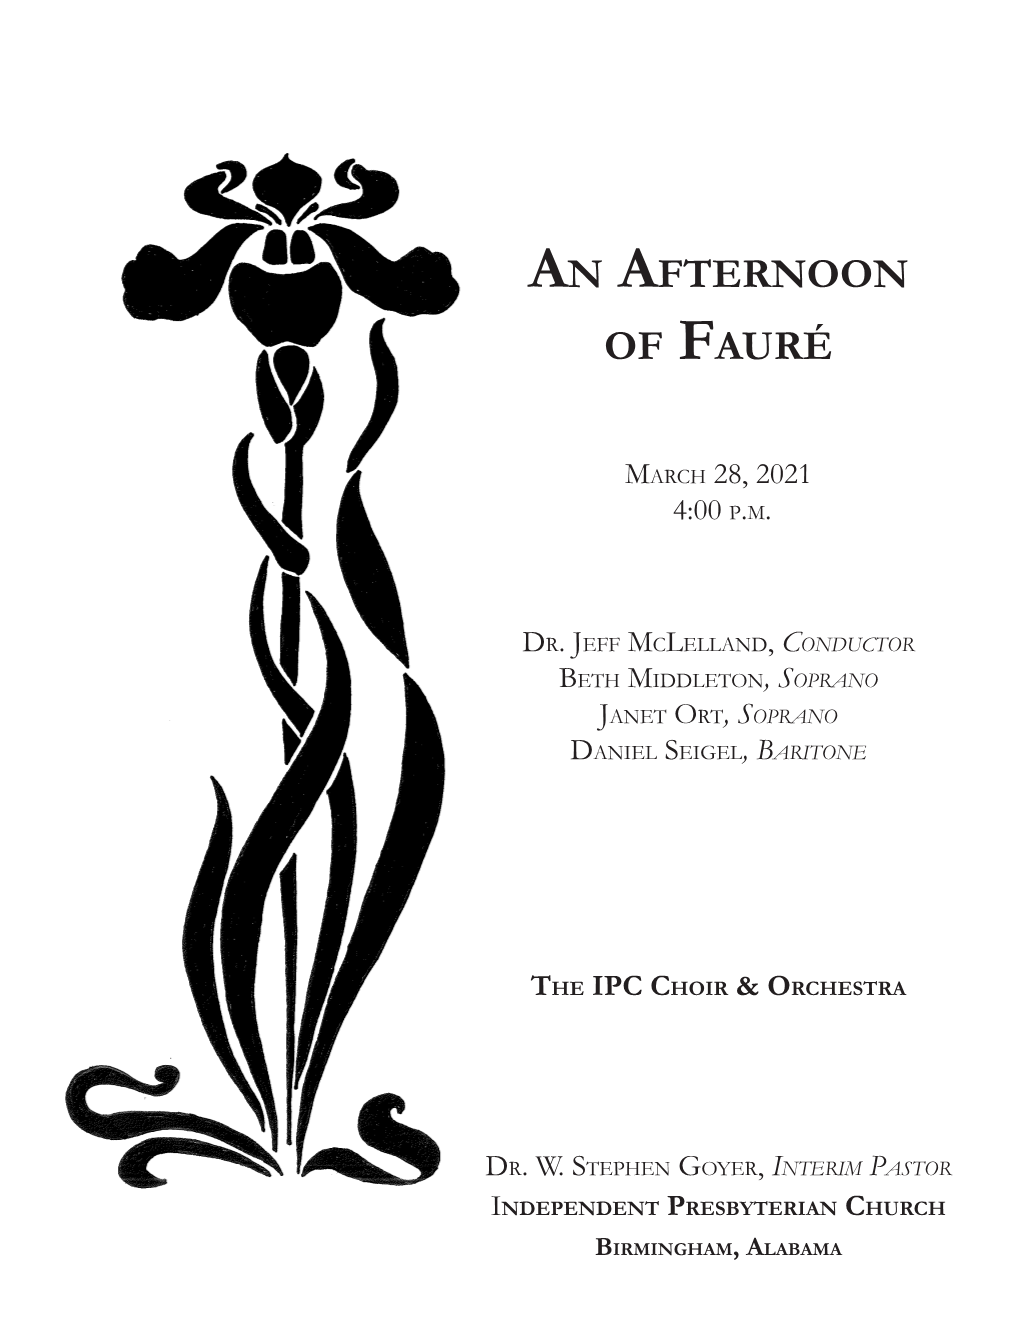 An Afternoon of Fauré